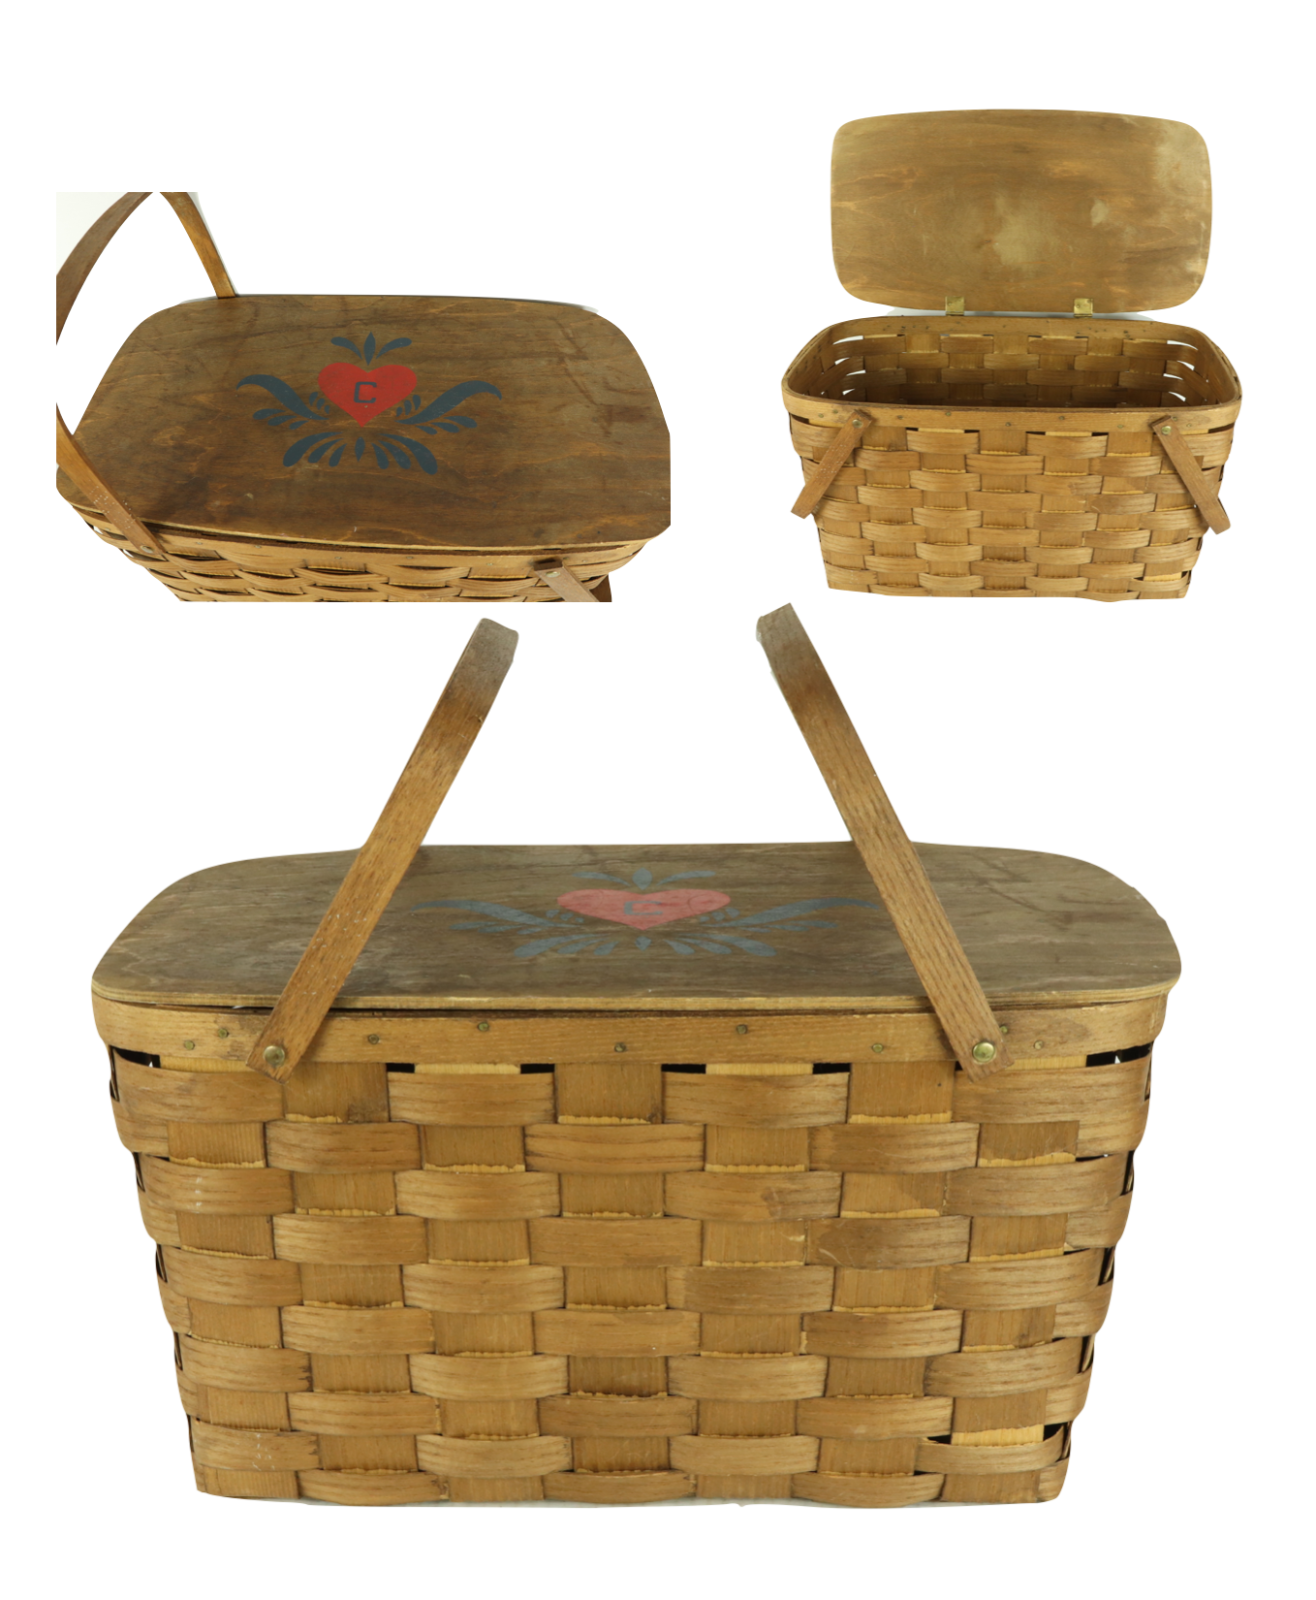 Primary image for Vintage 50s Two Handle Hinged Wicker Picnic Basket Rockabilly Pinup C Heart Wood